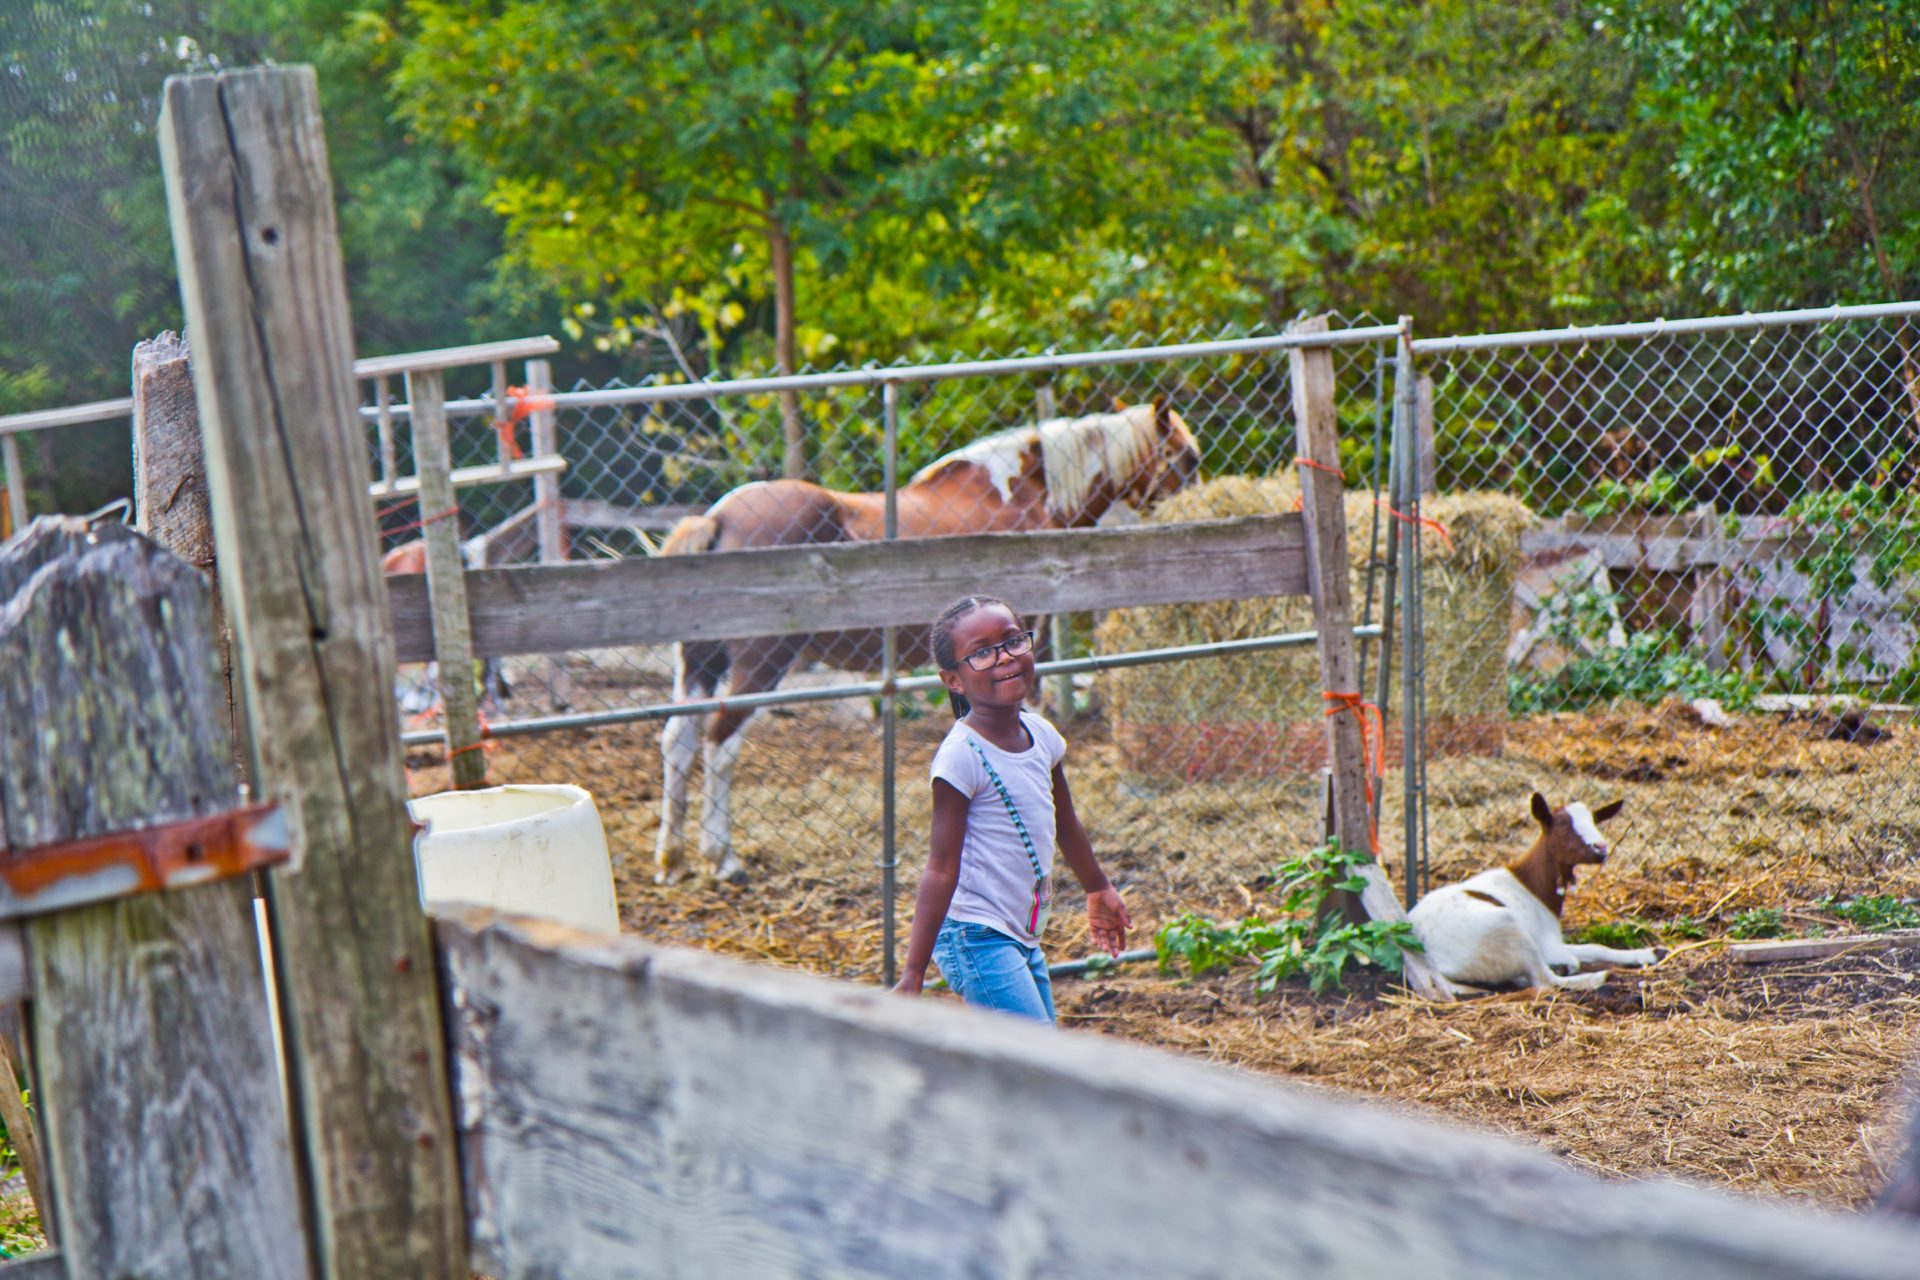 Lyrik Nelson, 5, plays at the Concrete Cowboys stable near Bartrams Gardens. The stable is moving to inside the gardens.